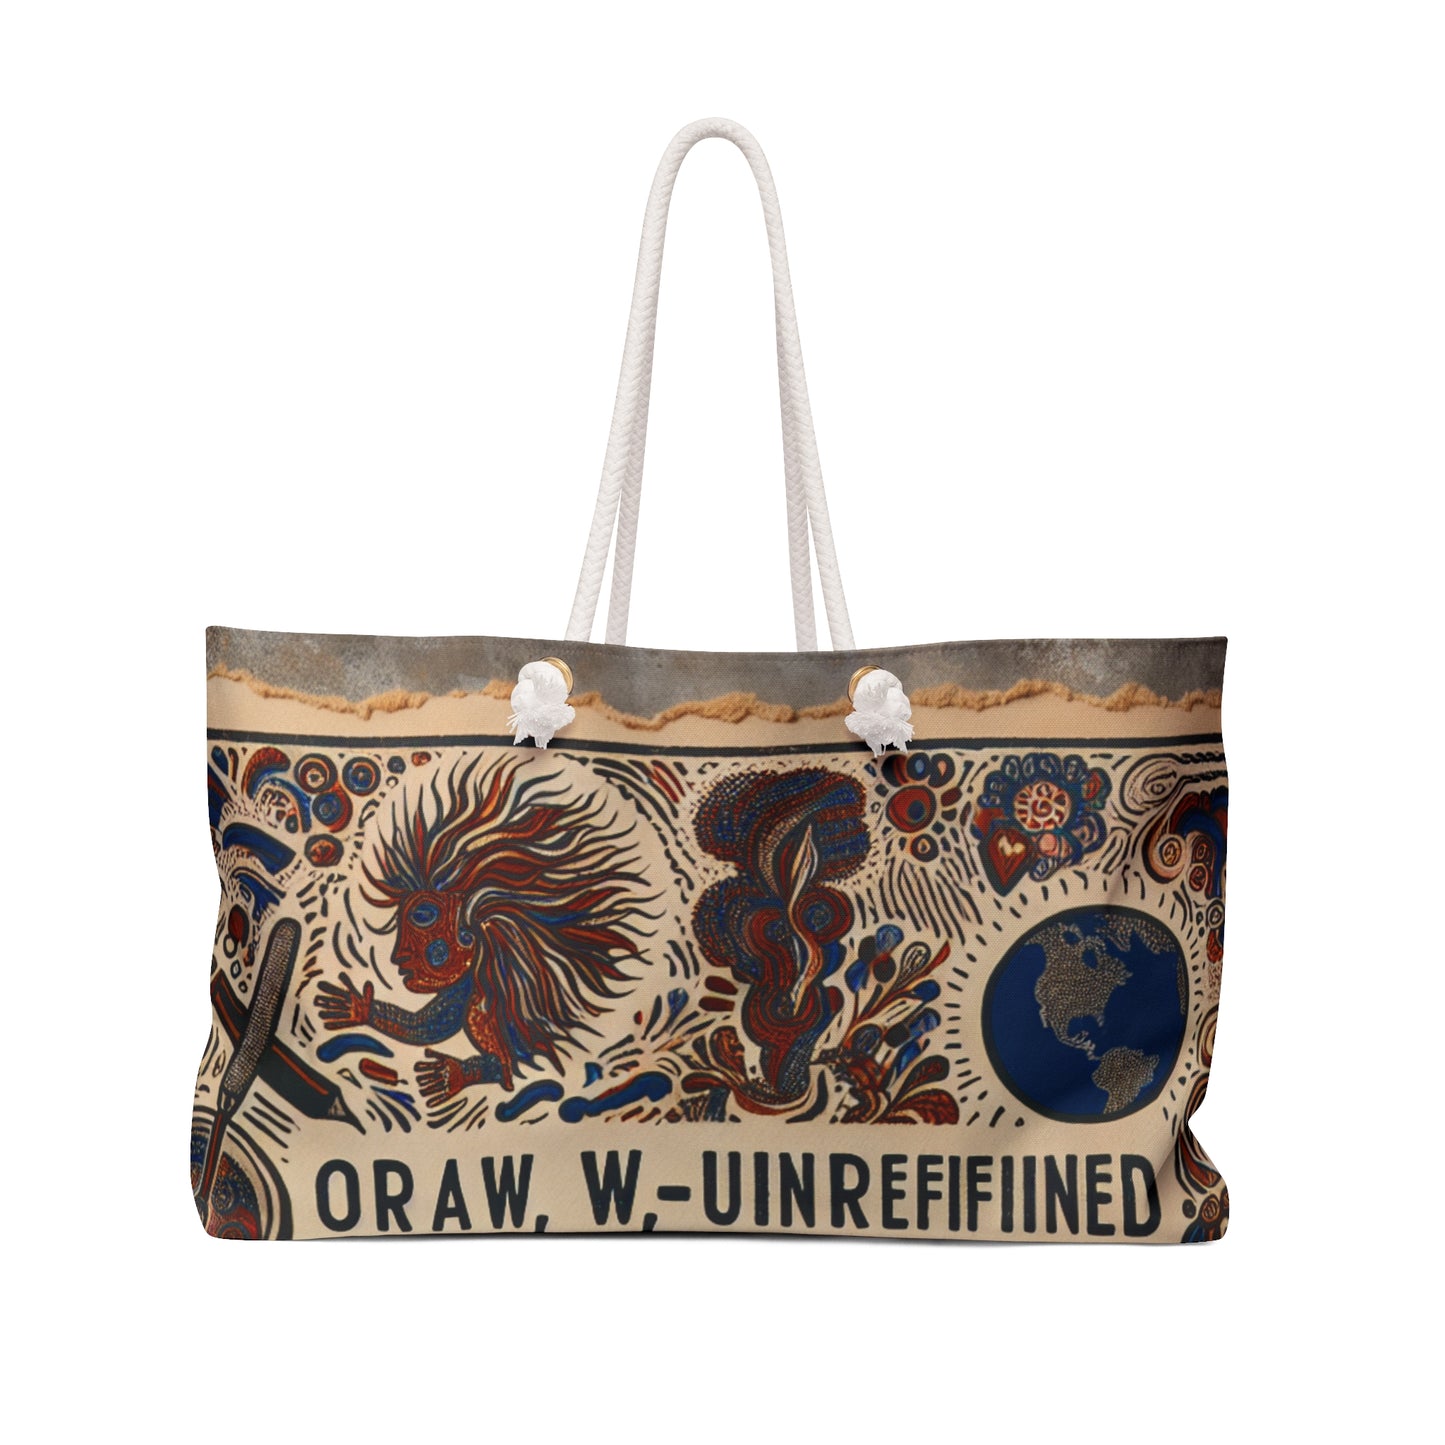 "Visions of the Beyond: A Surreal Dreamscape" - The Alien Weekender Bag Outsider Art